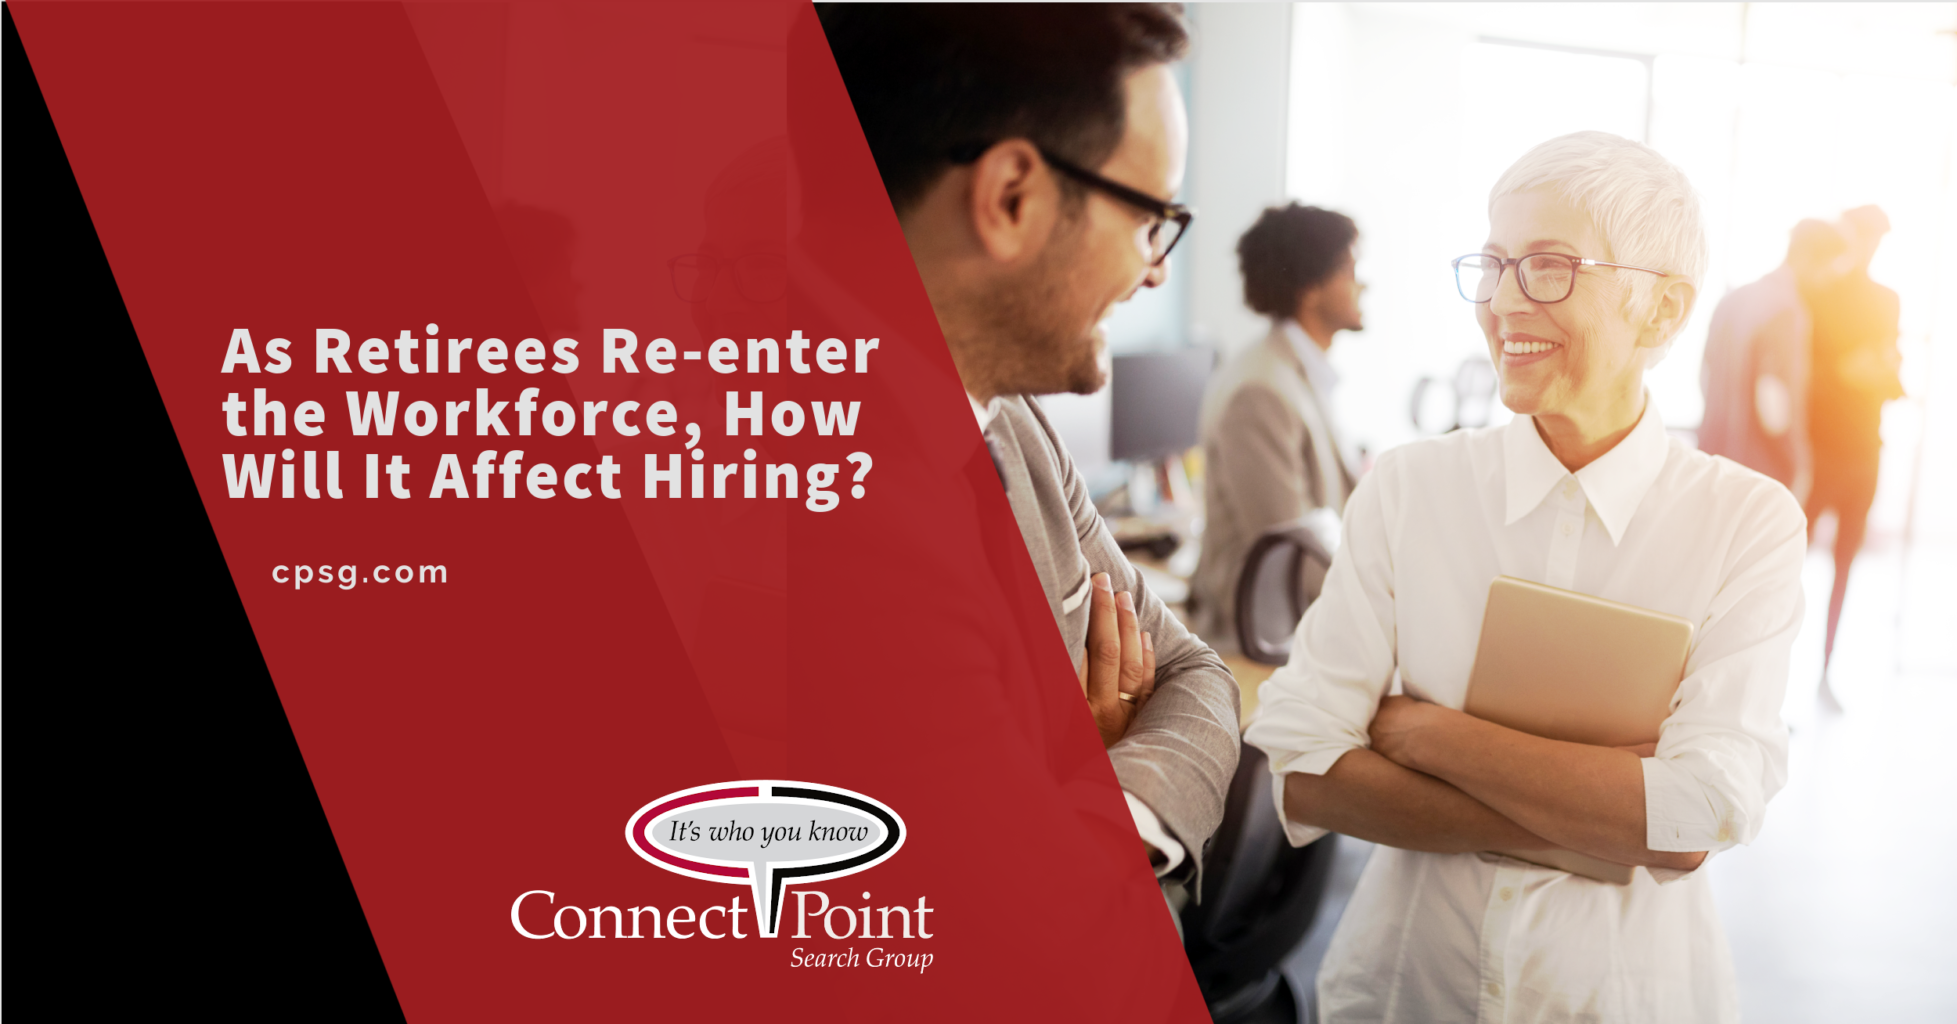  How Will Retirees Re-entering the Workforce Affect Hiring? 